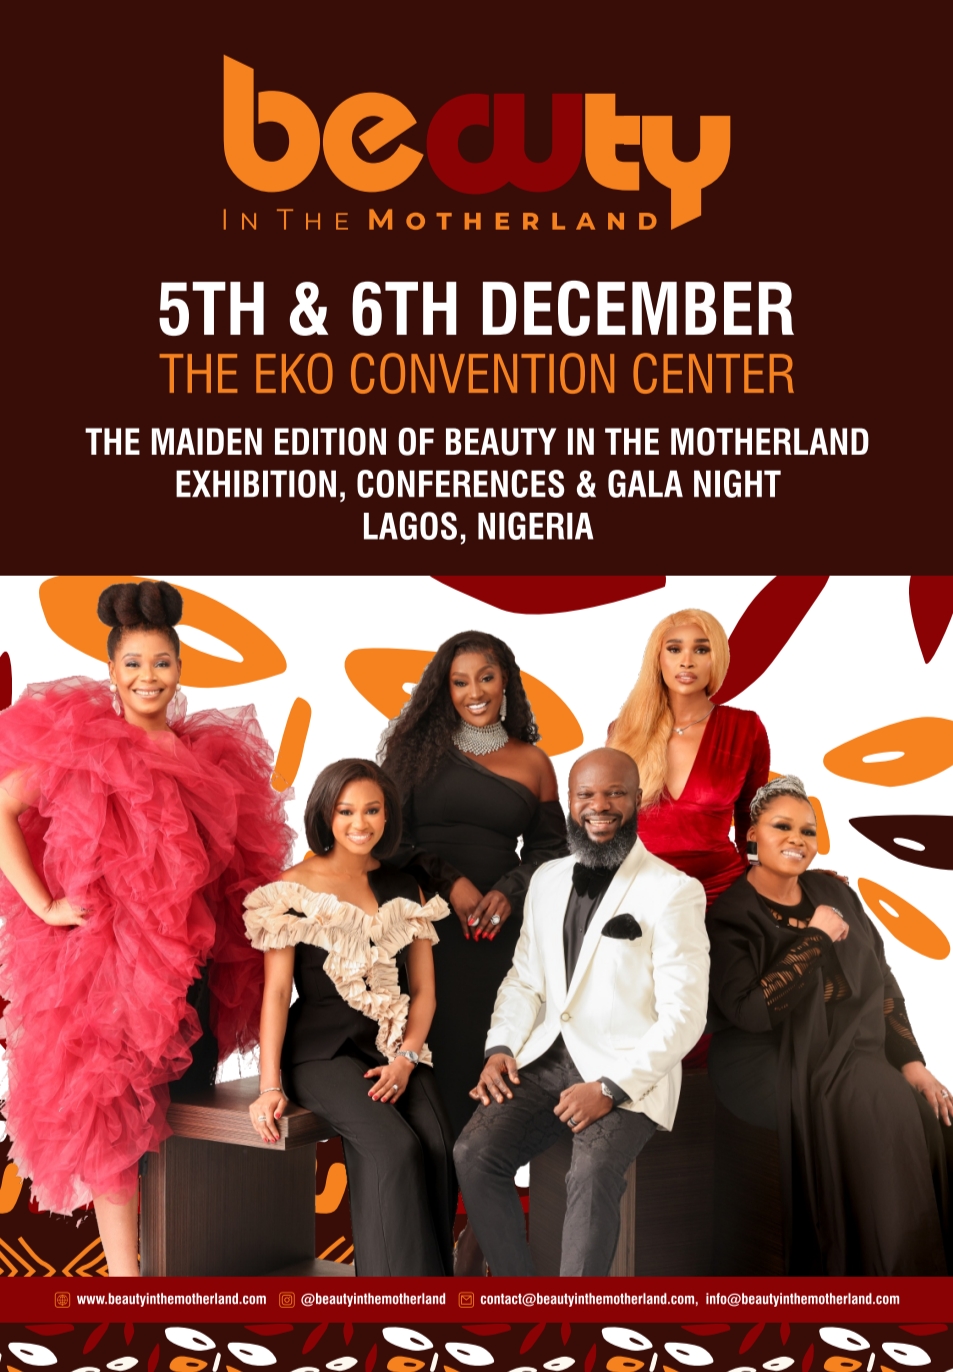 Beauty In The Motherland: A Grand Spectacle of Innovation and